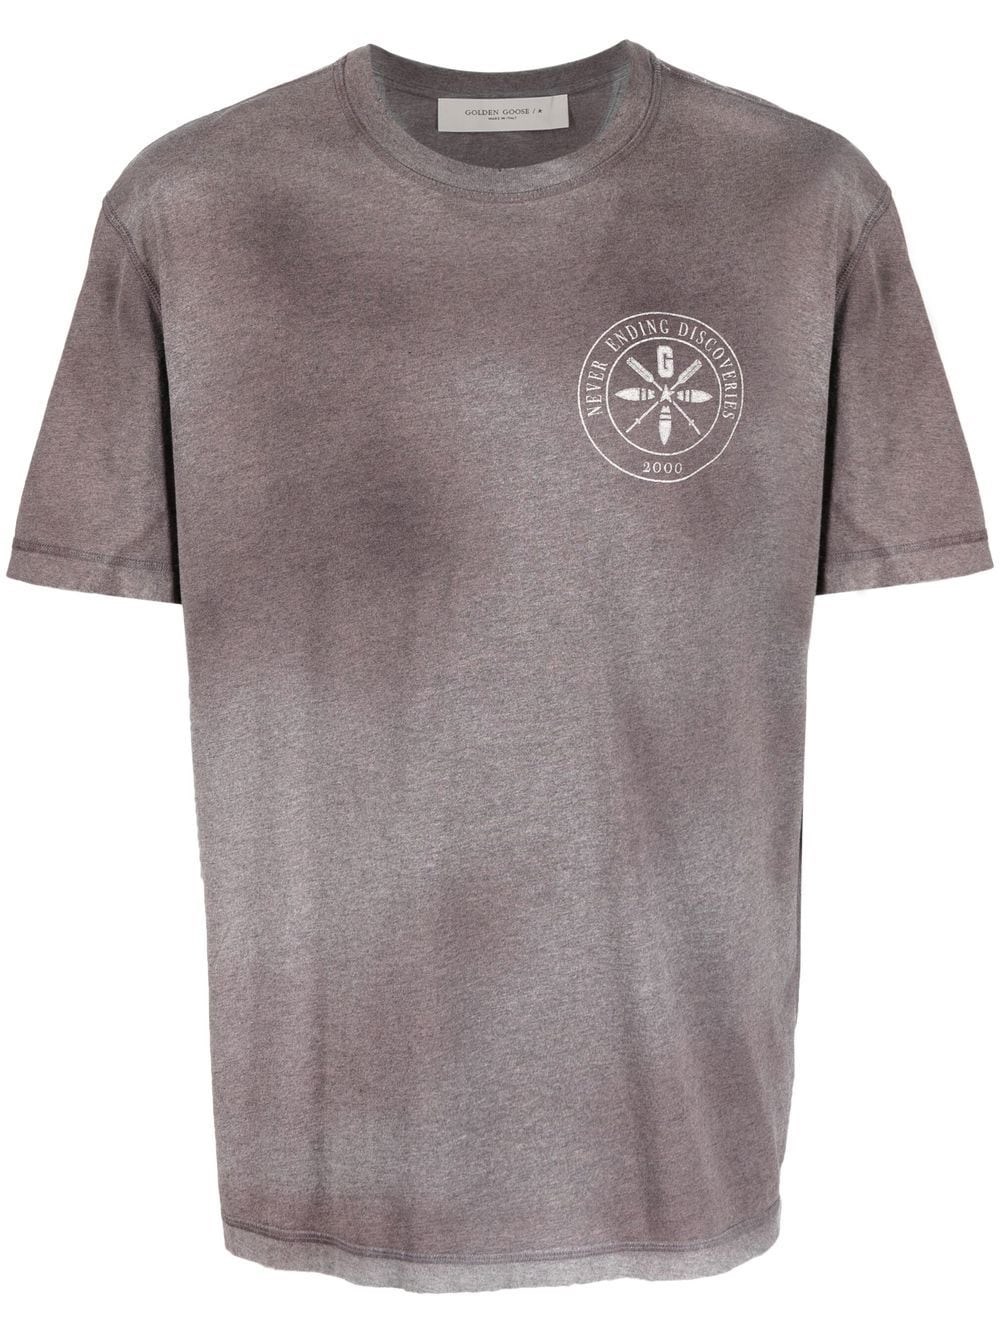 Golden Goose `journey - Never Ending Discoveries` T-shirt In Grey